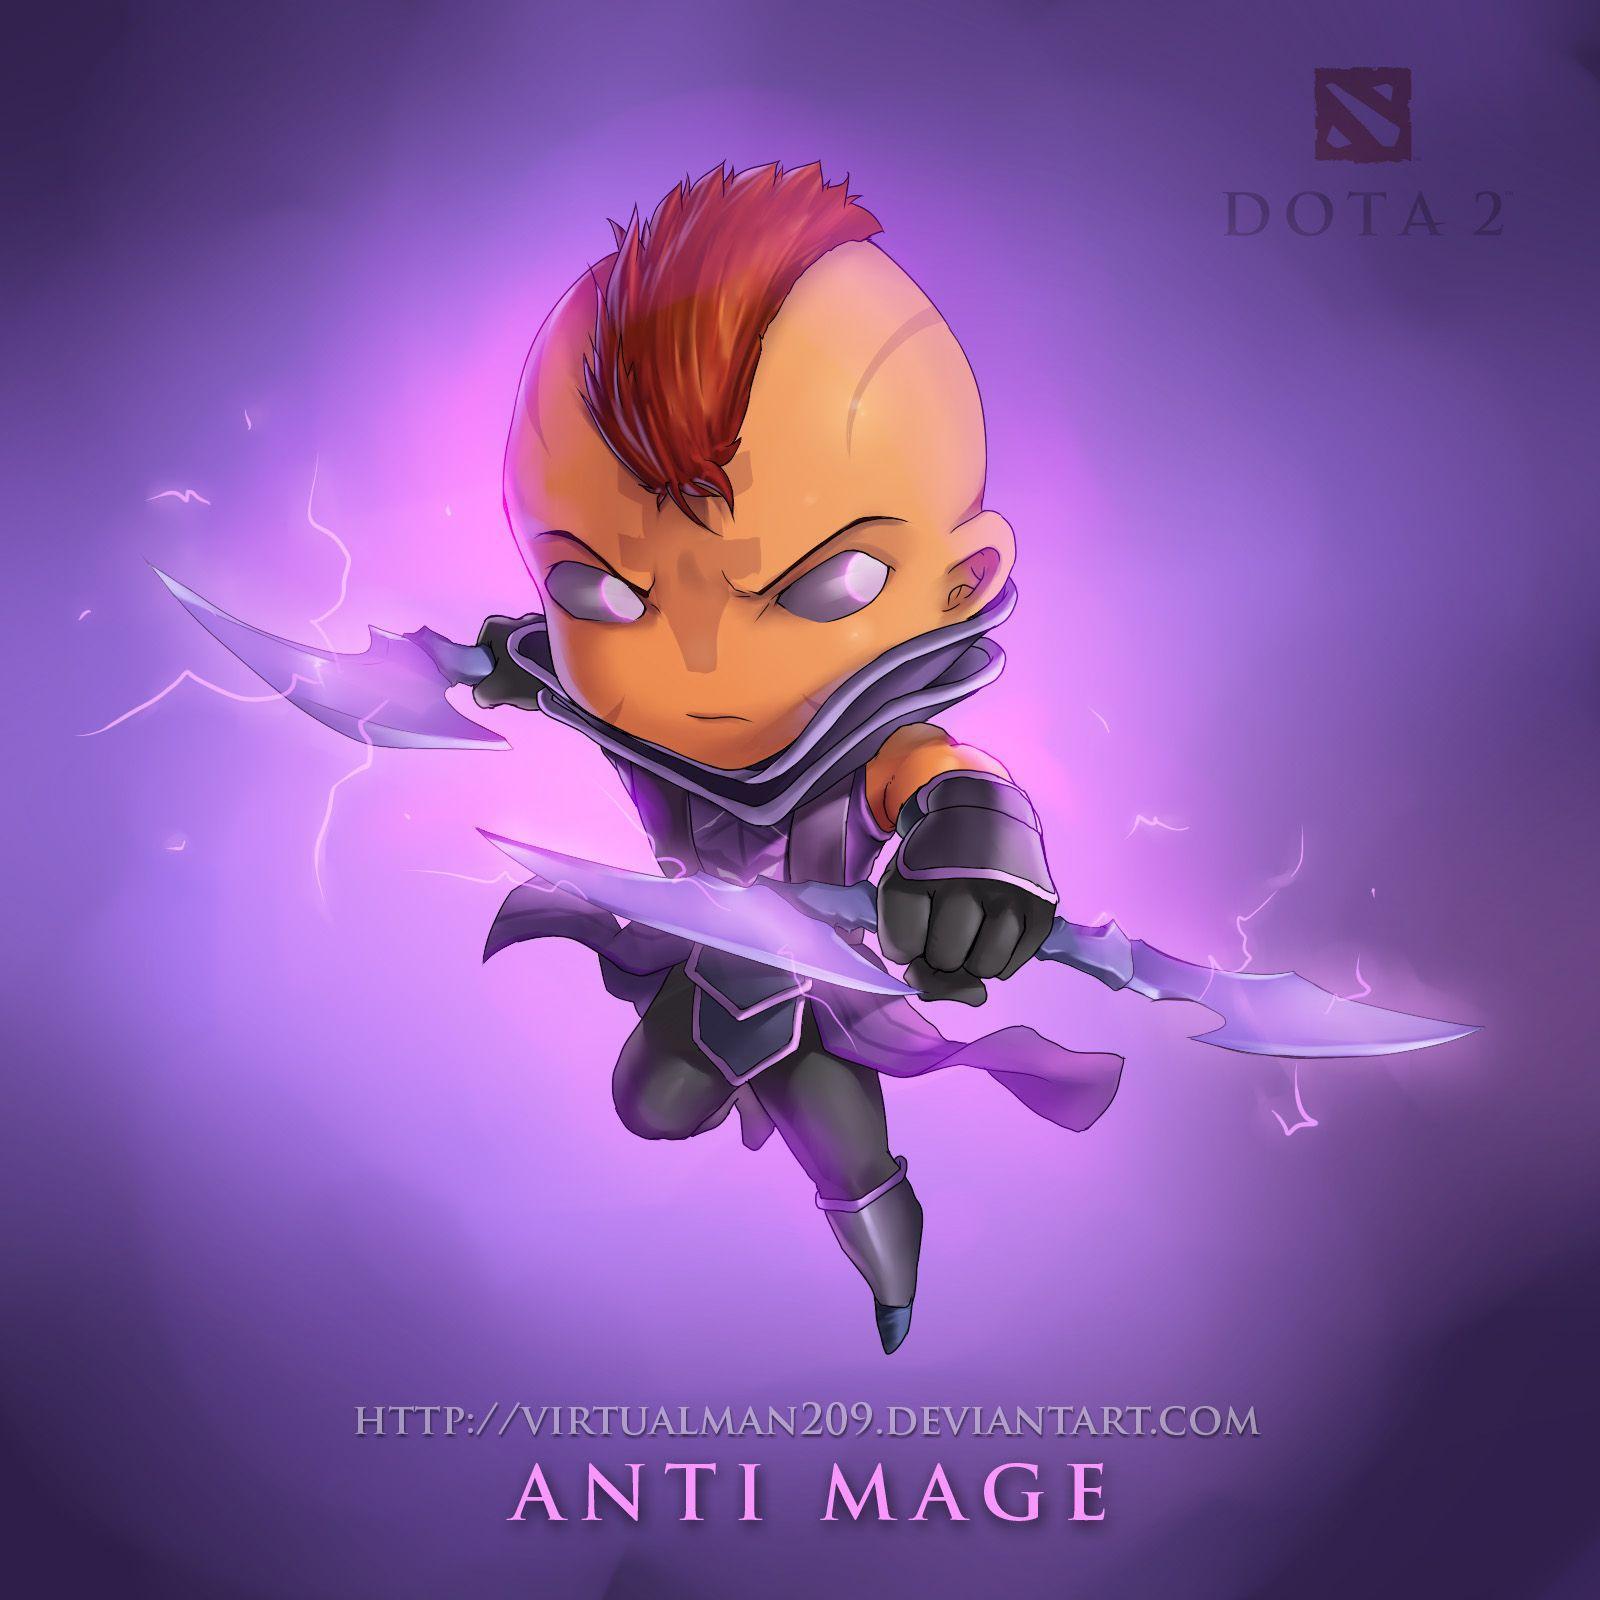 Anti-Mage Wallpapers - Wallpaper Cave